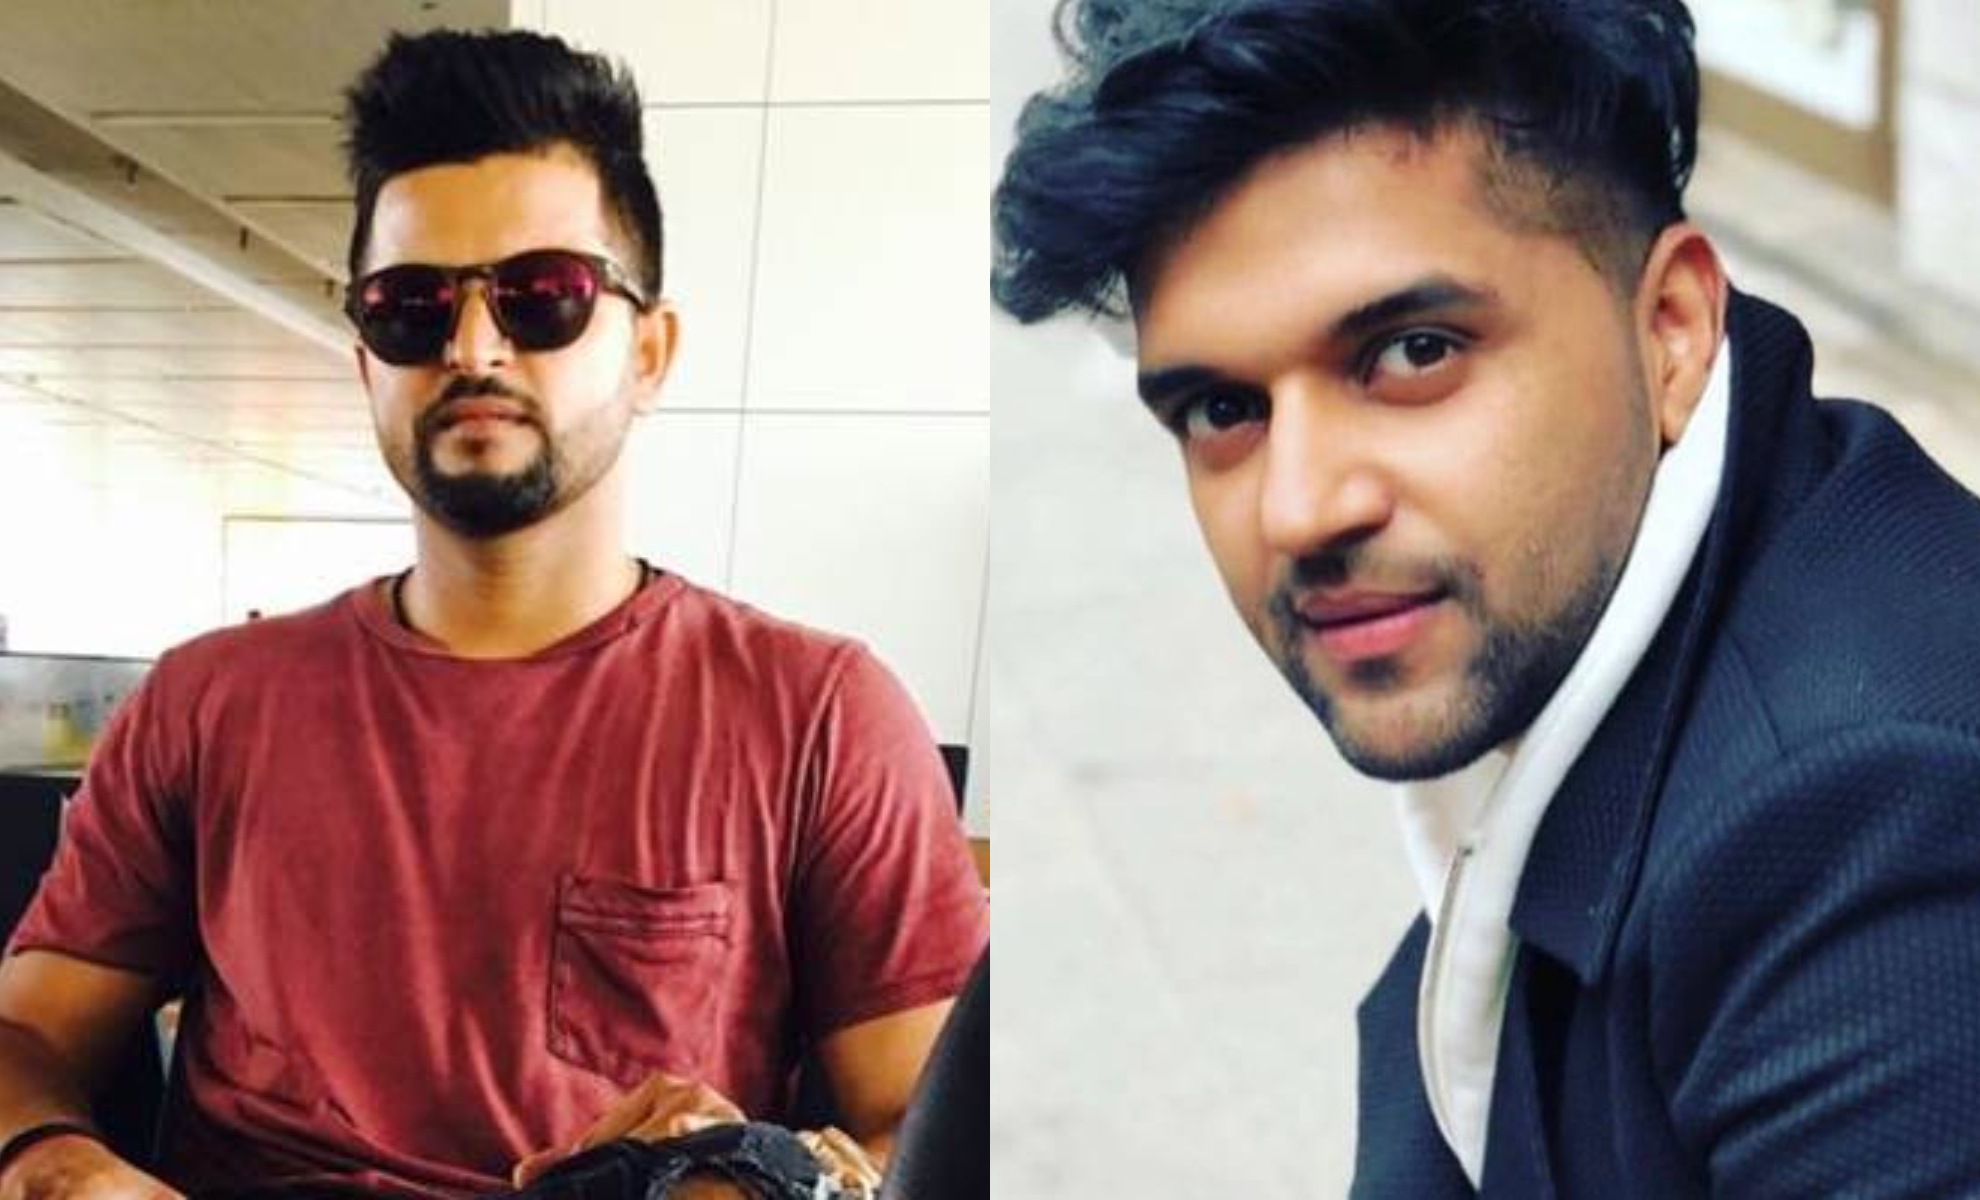 34 people including Raina and Randhawa were arrested from a Mumbai night club